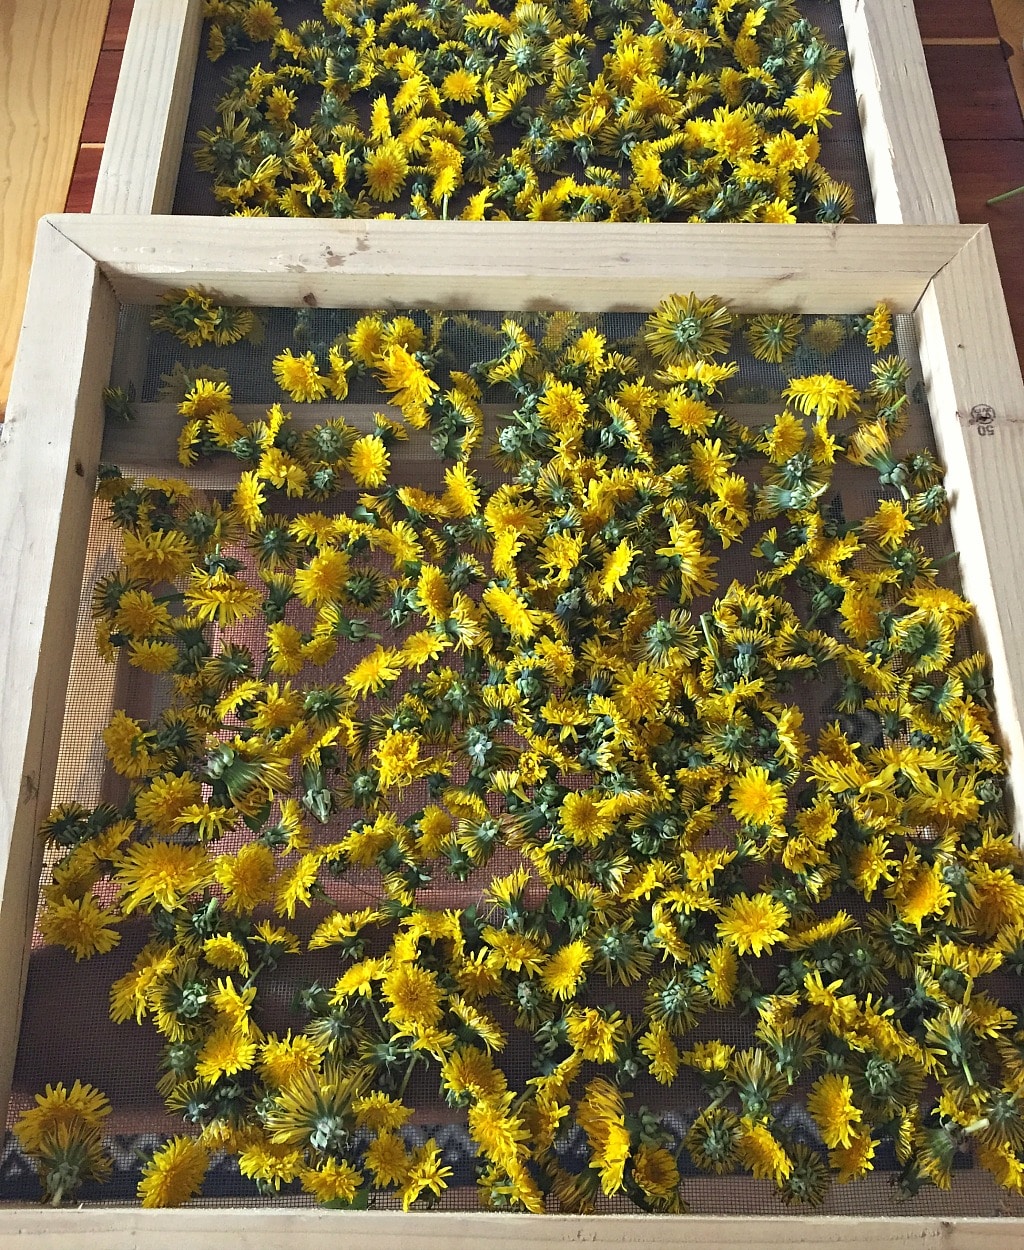 foraged dandelions drying on a screen